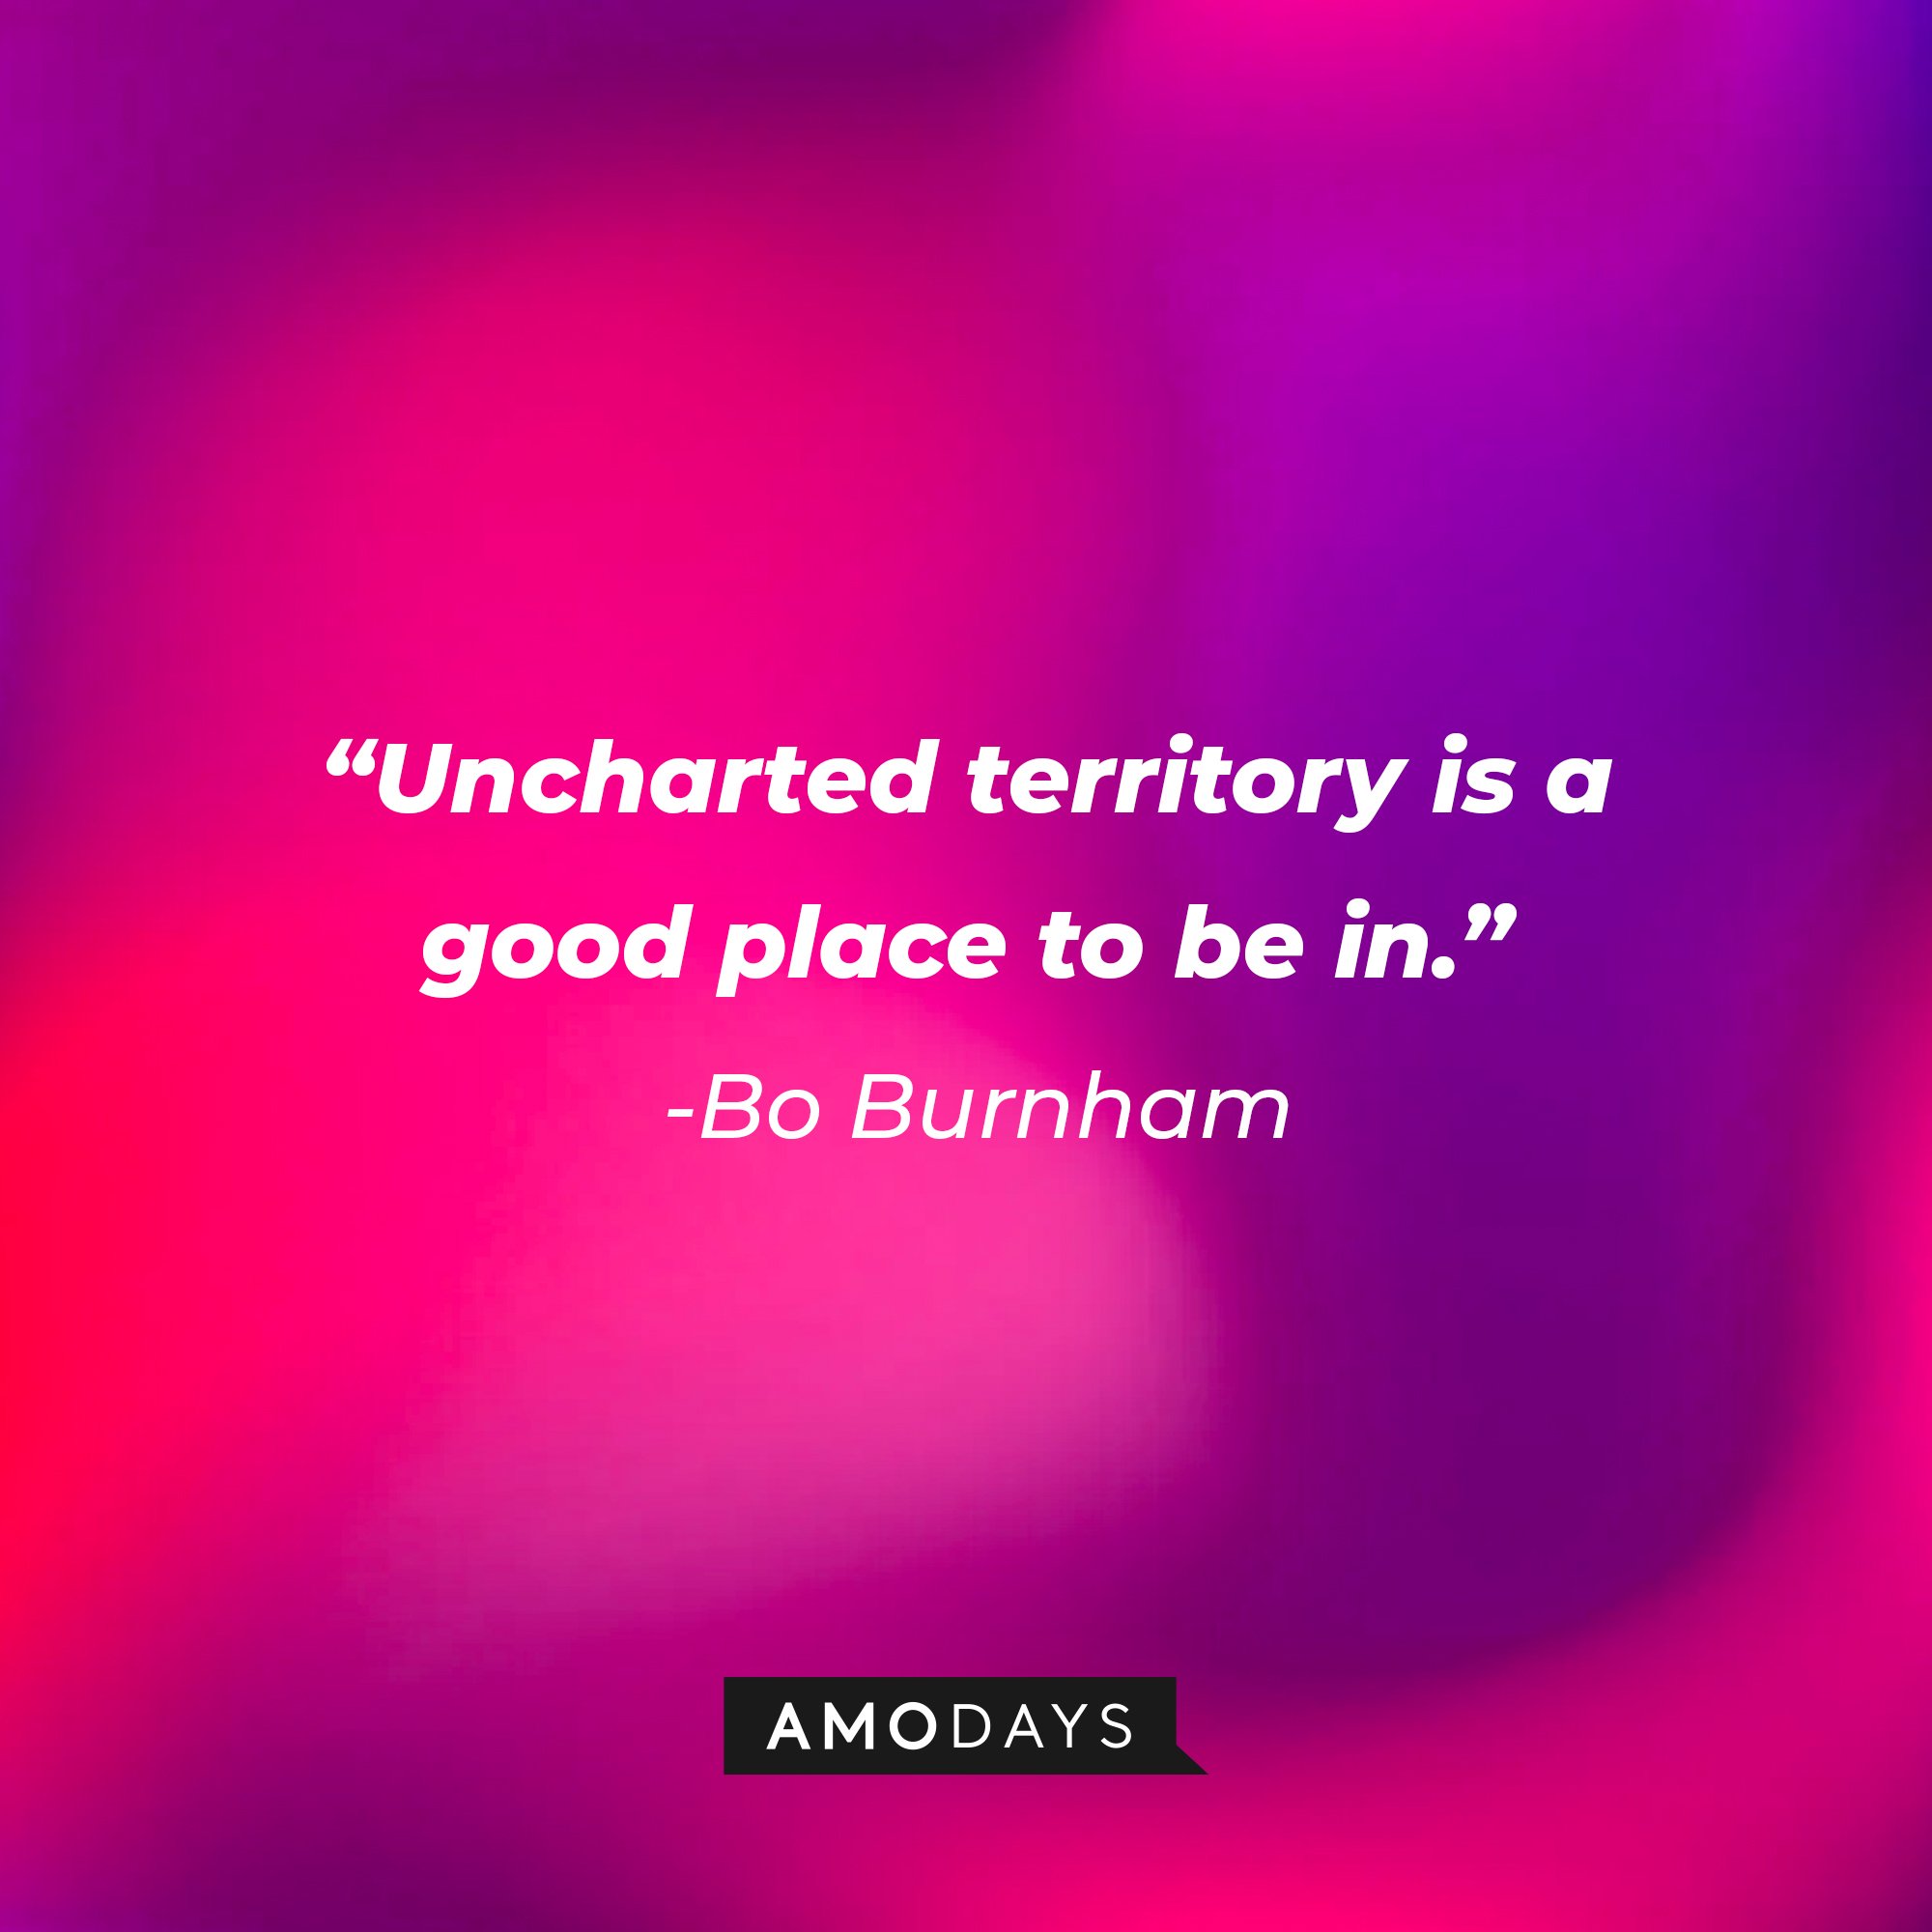 Bo Burnham’s quote: "Uncharted territory is a good place to be in." | Image: AmoDays